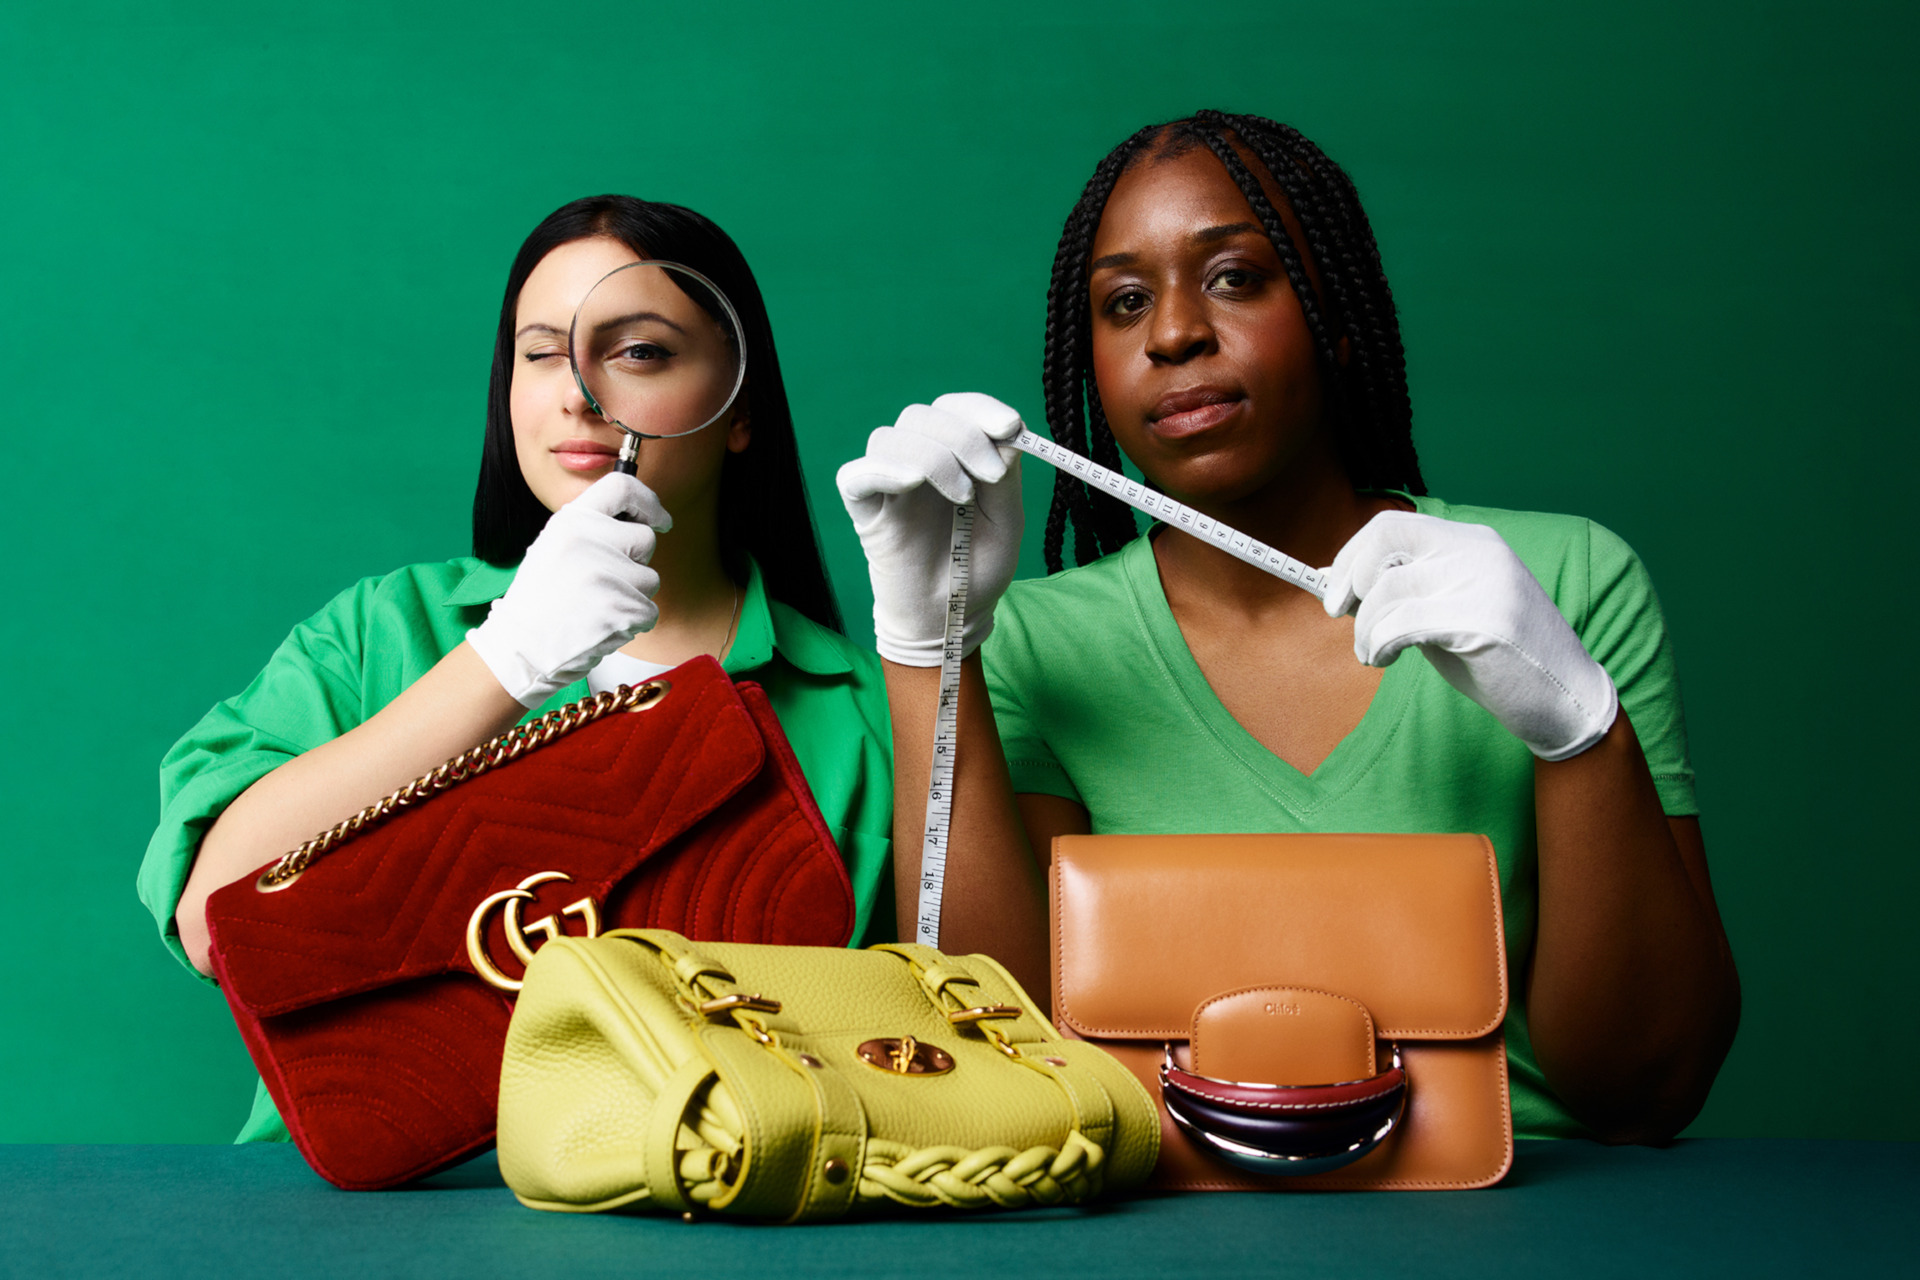 Two women holding measuring tape and a magnifying glass to inspect handbags on the table in front of them